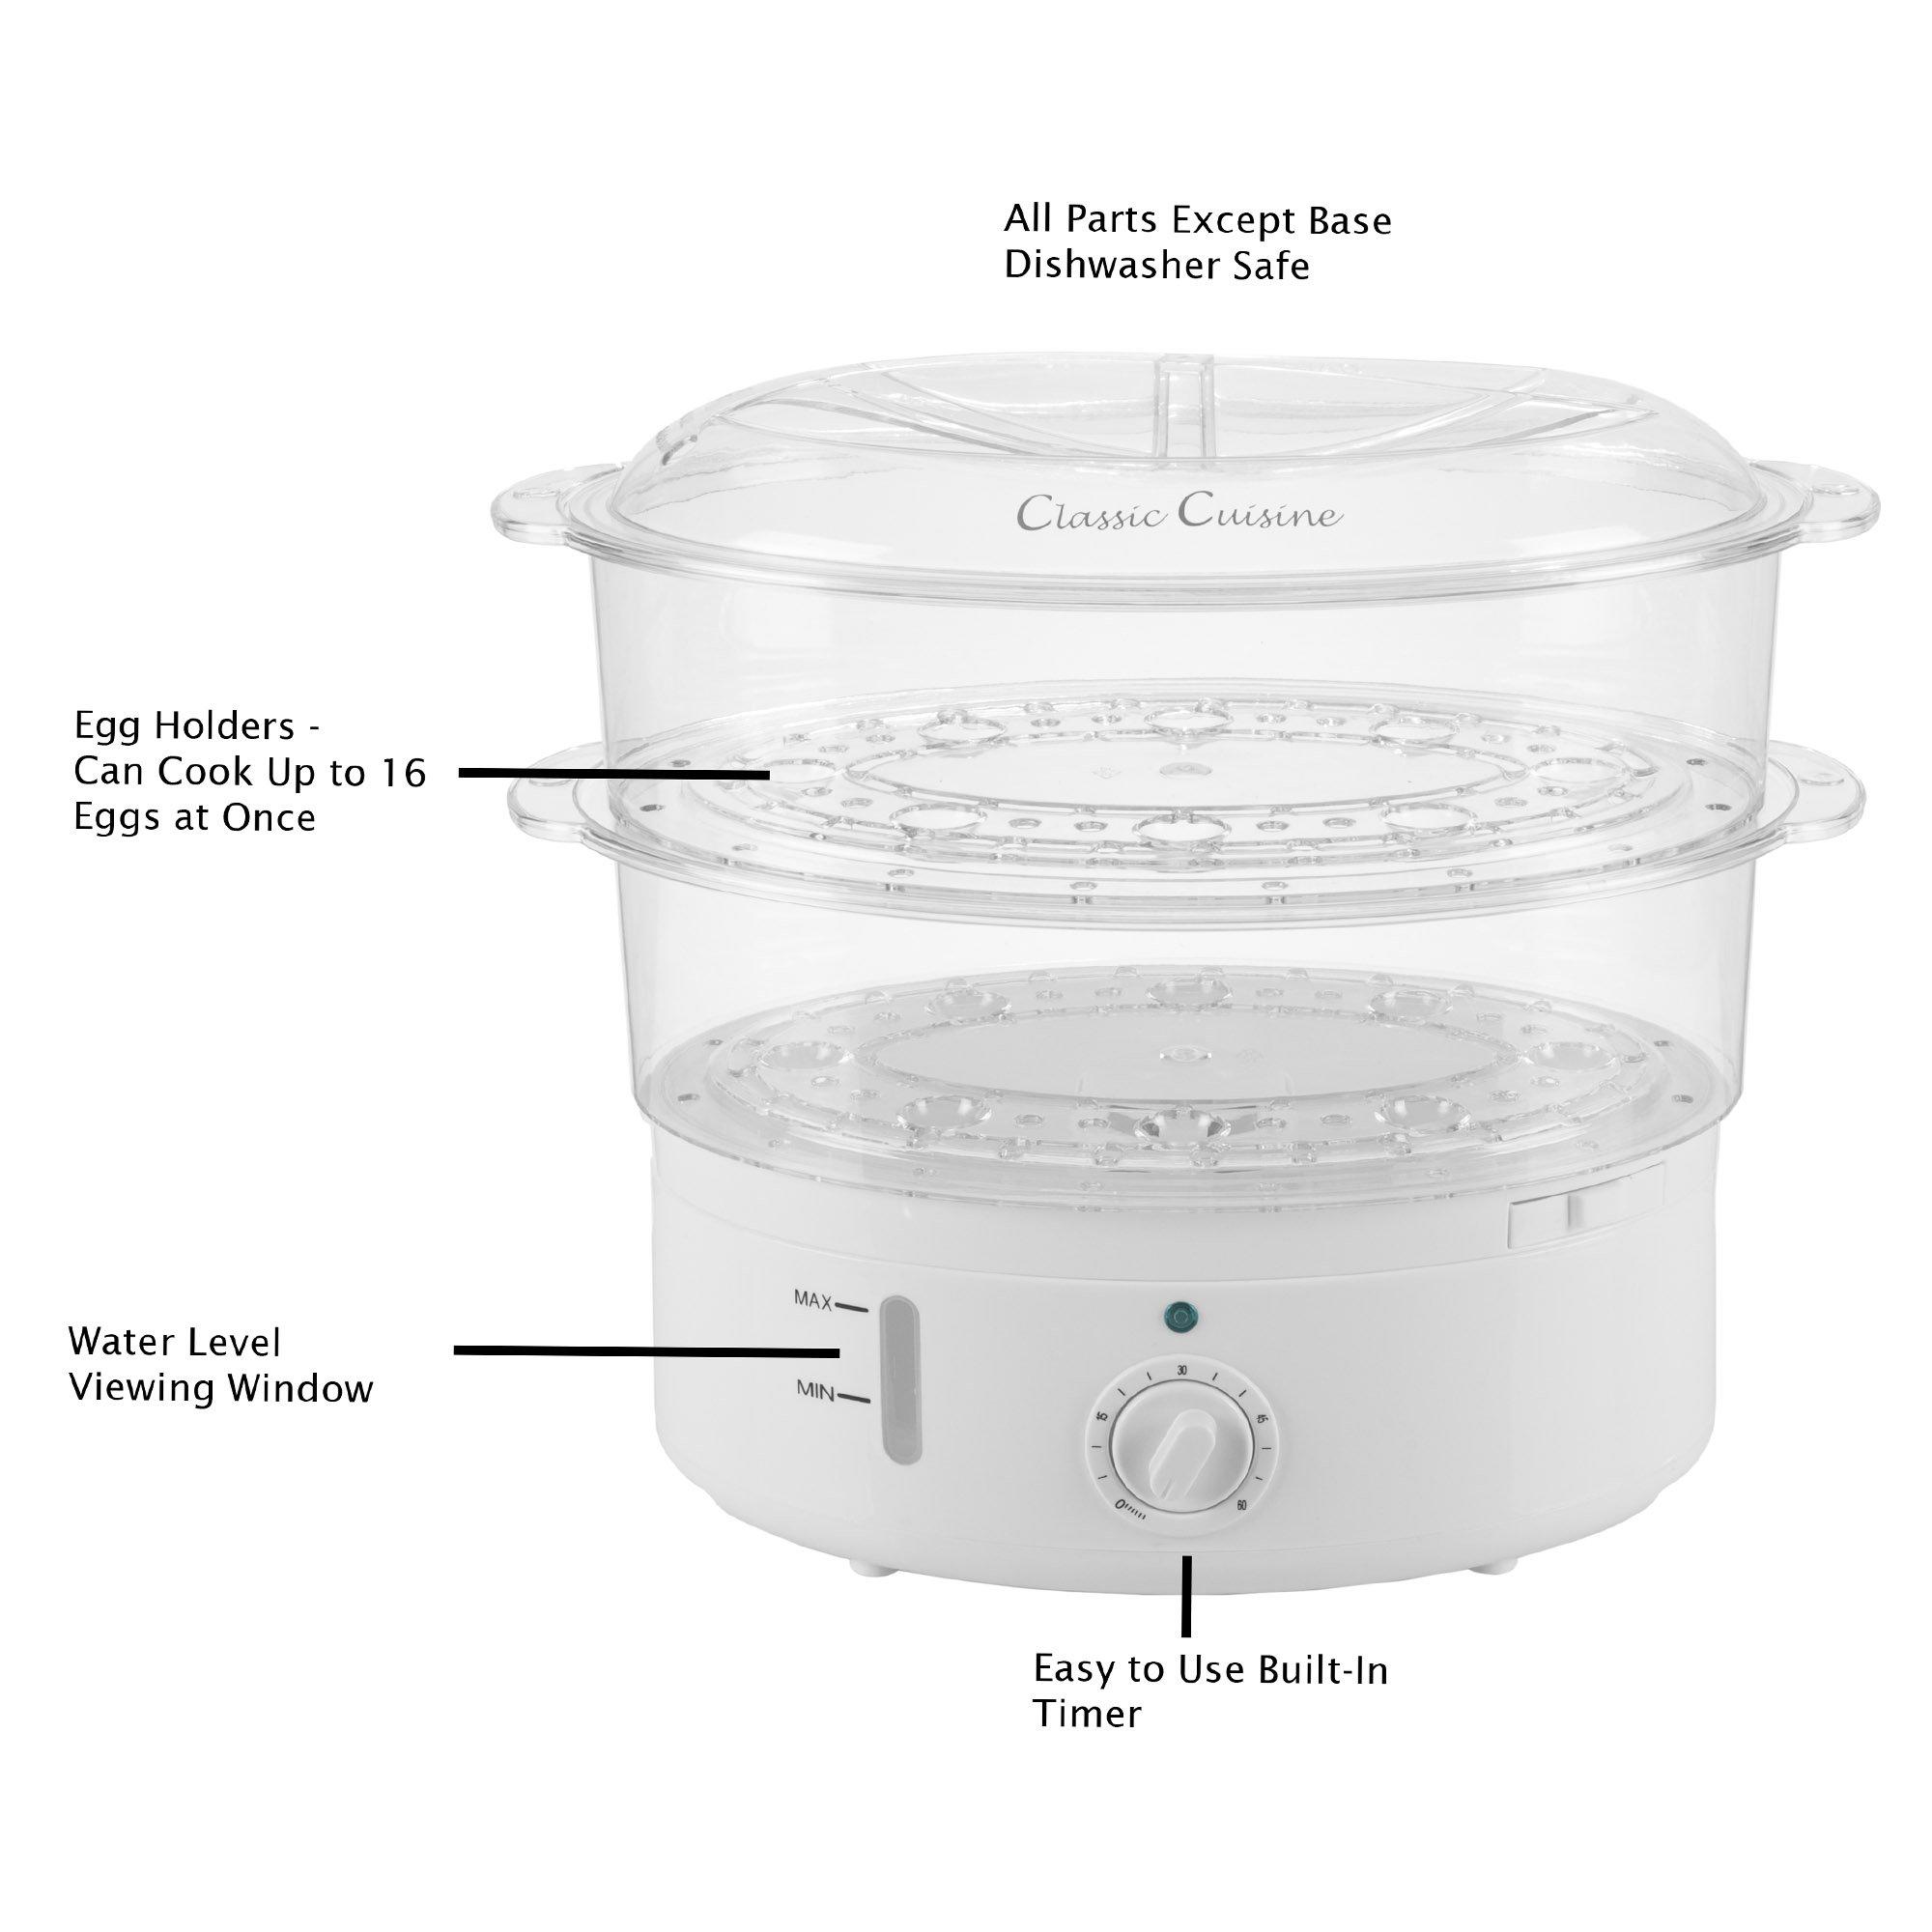 Classic Cuisine Food Steamer and Rice Cooker in one, Two-Tier Food Steamer for Healthy Meals anytime, cooks Vegetables, Fish, Dumplings, Eggs and more, 6.3 QT, Clear